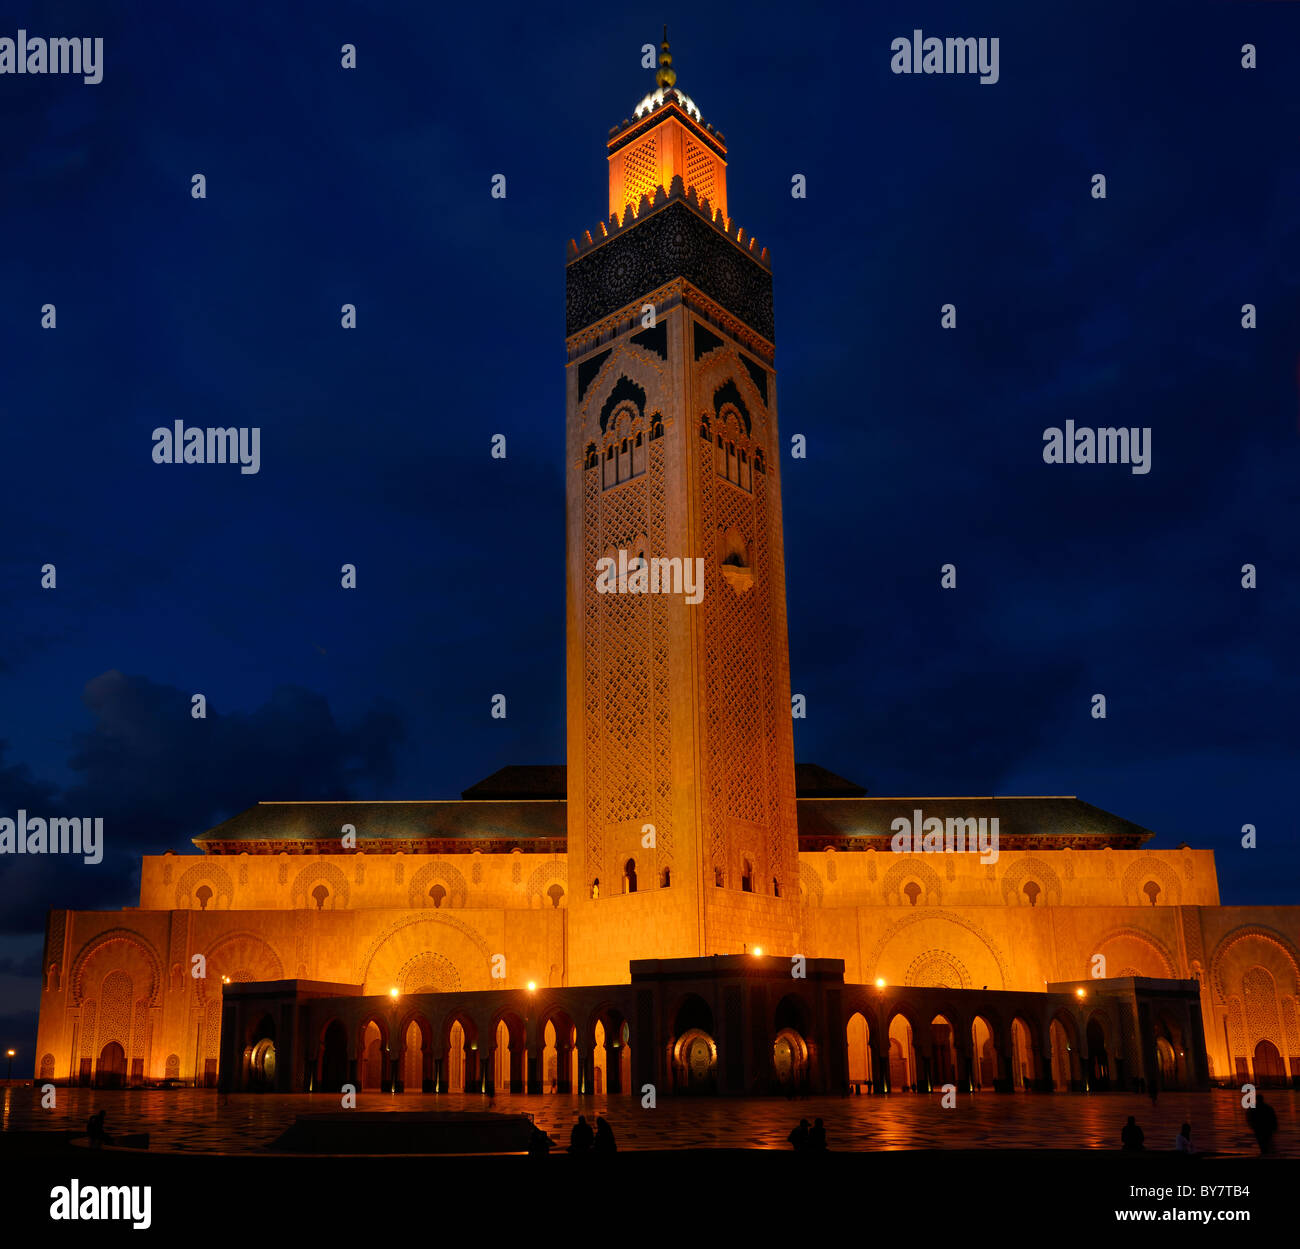 Golden lights on Hassan II Mosque and minaret at night in Casablanca Morocco Stock Photo